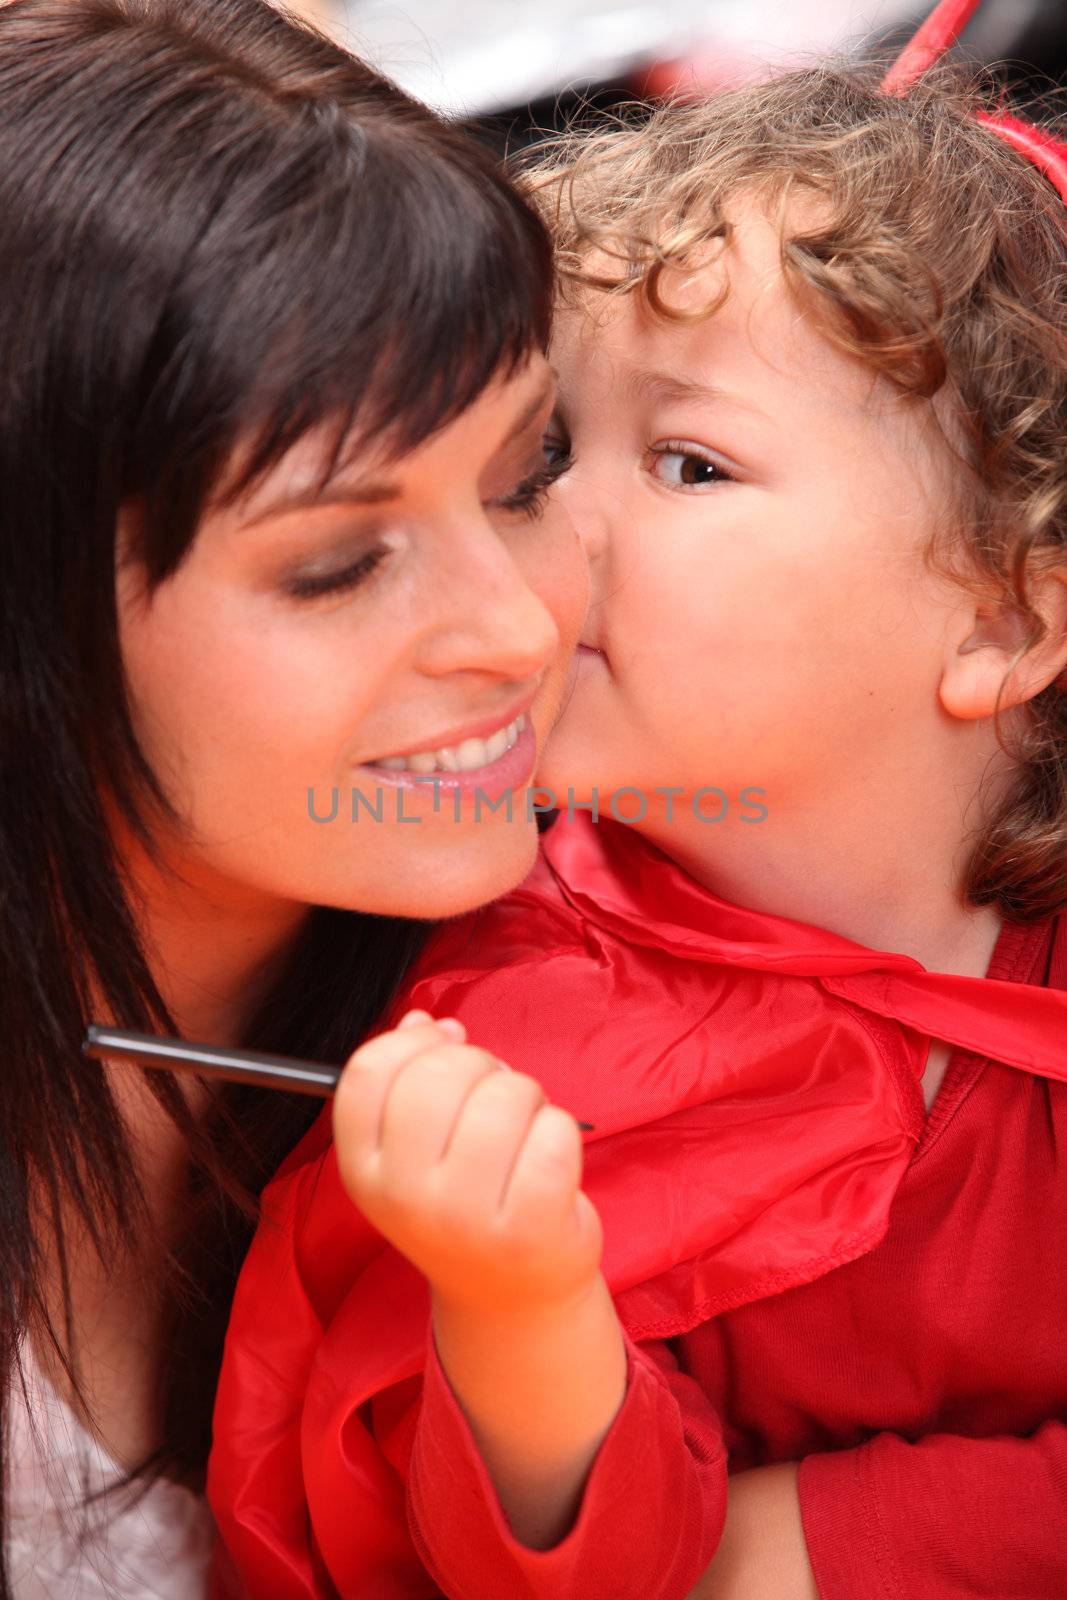 Child whispering into her mother's ear by phovoir